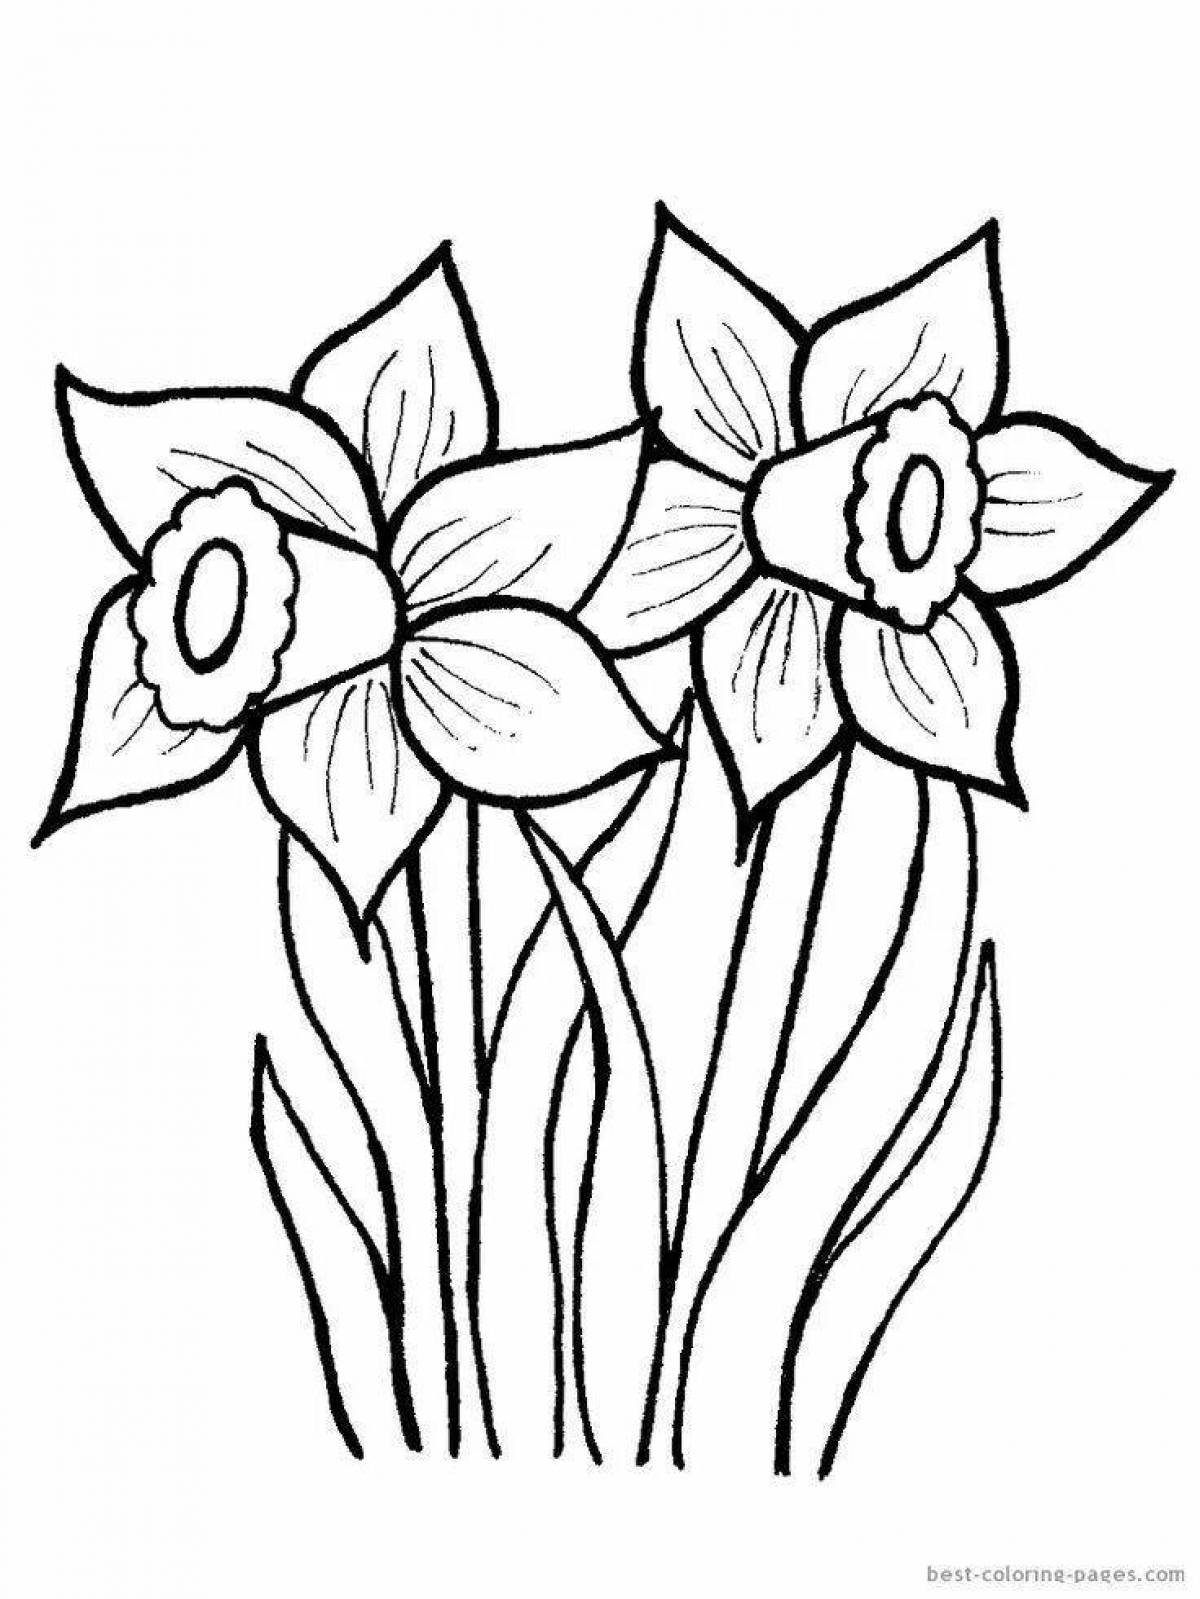 Exquisite spring flowers coloring book